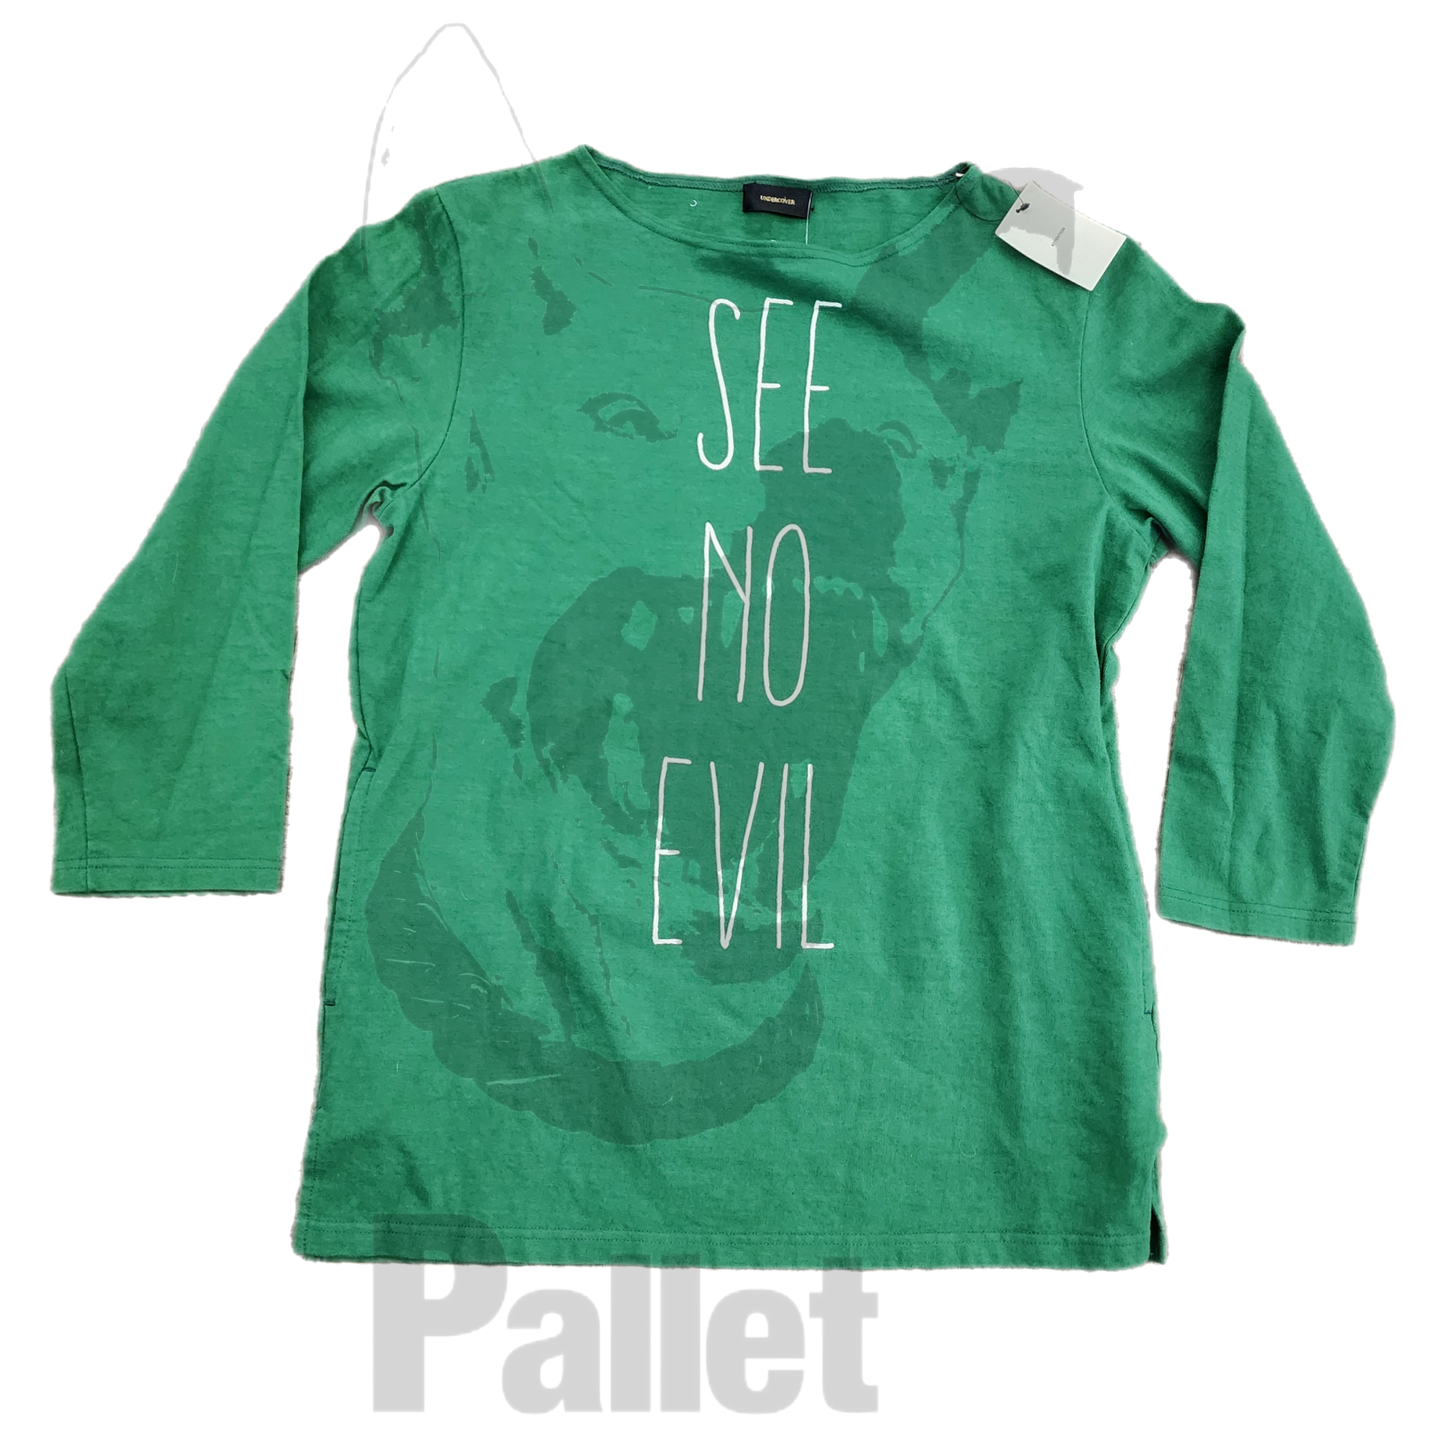 Undercover - "See No Evil Green Long Sleeve" - Size Medium